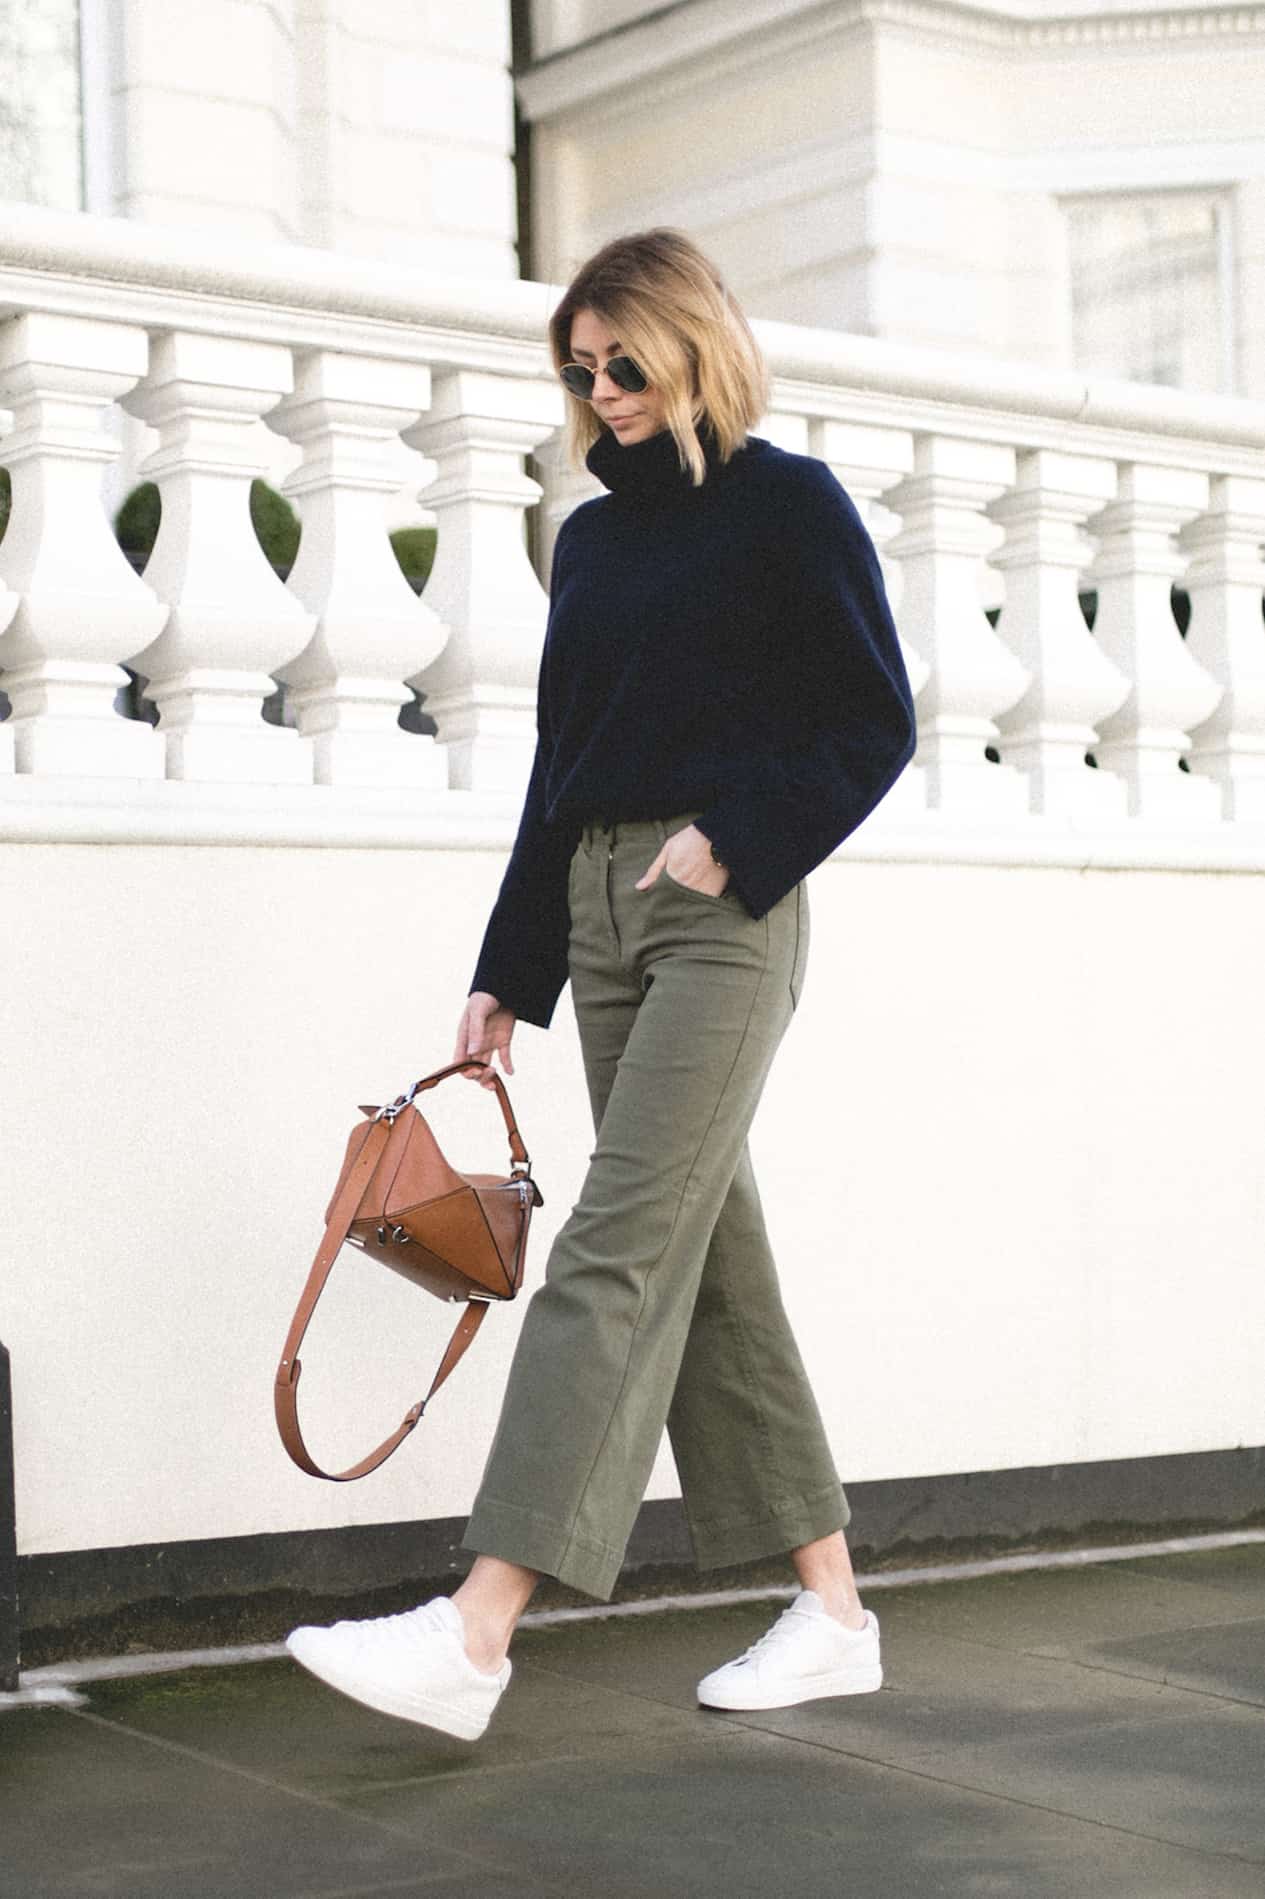 image of a woman walking down the sidewalk wearing green pants, a navy sweater, and white sneakers, holding a designer brown purse